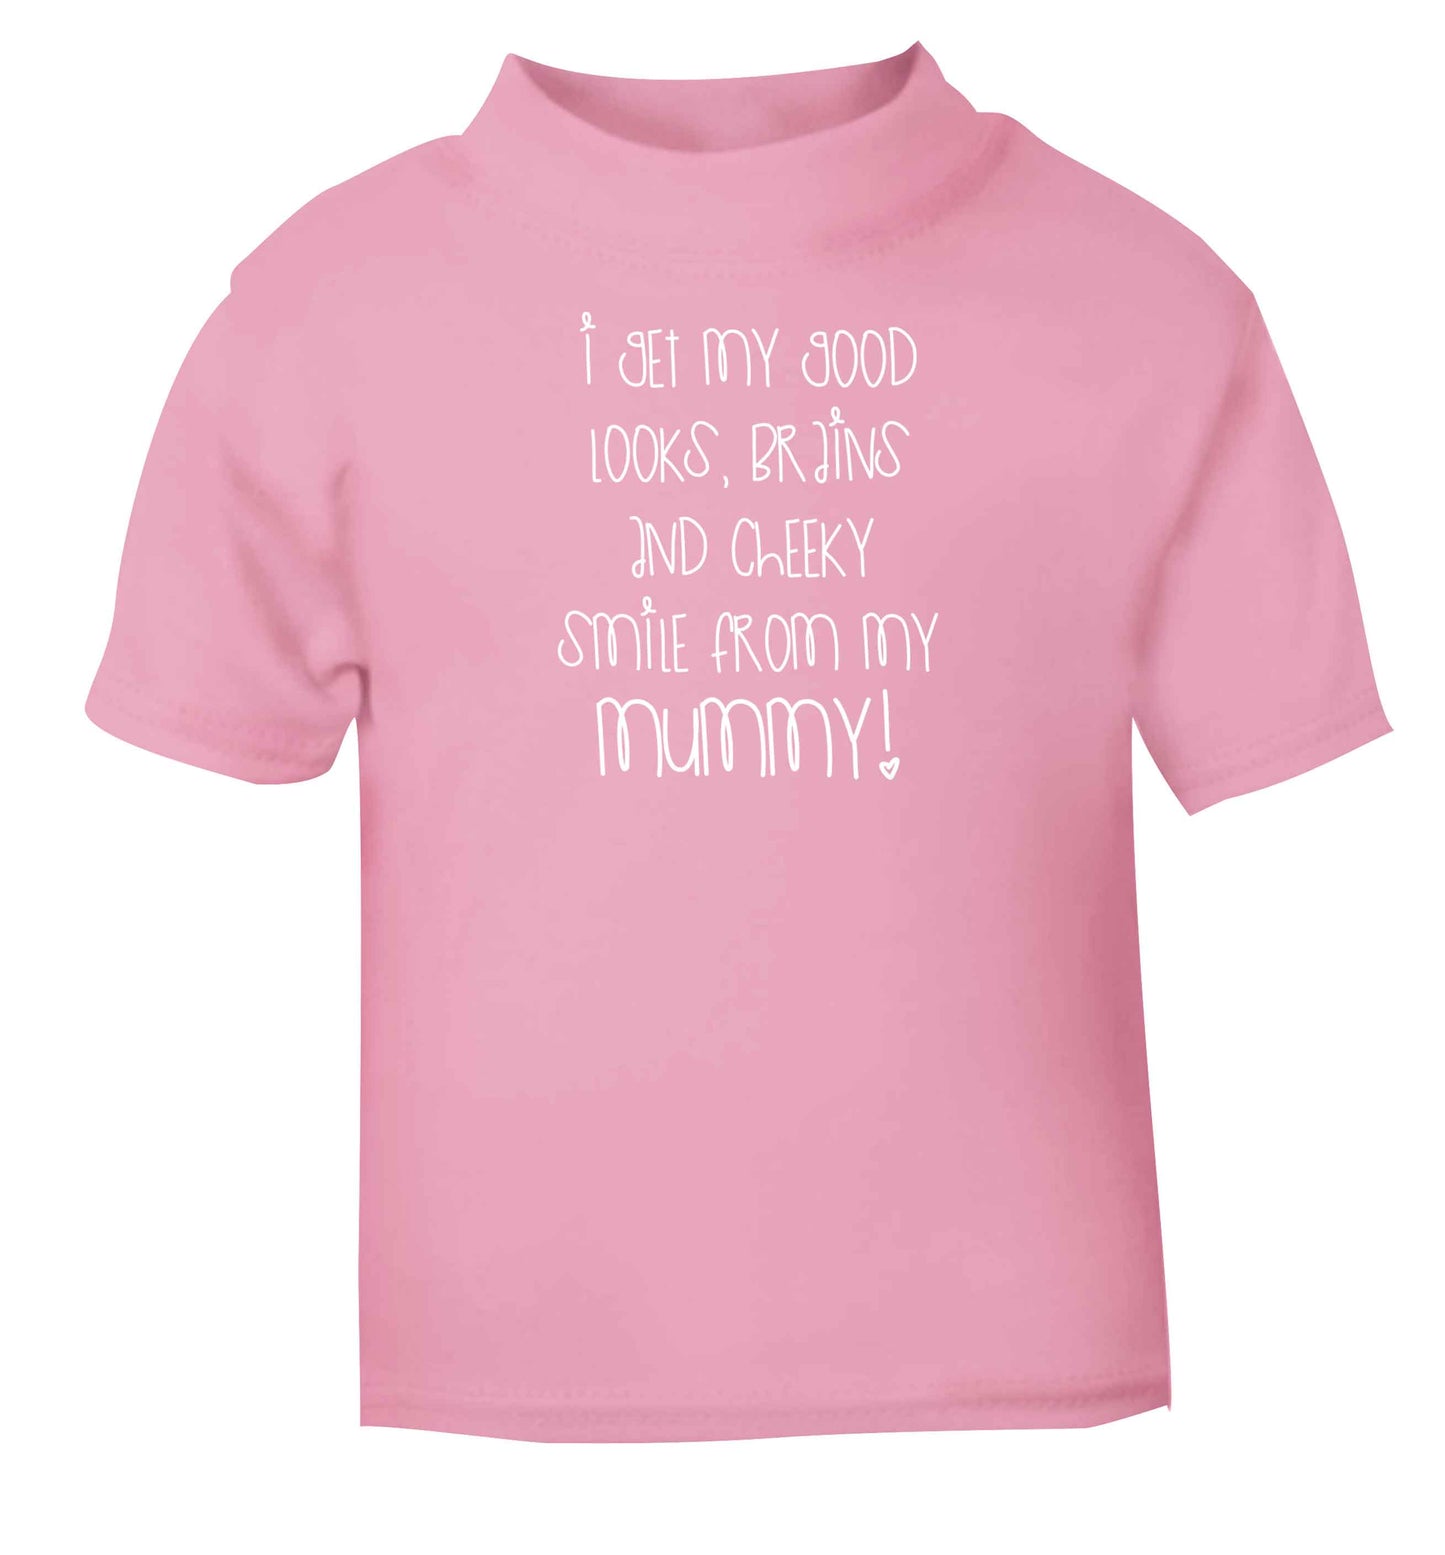 I get my good looks, brains and cheeky smile from my mummy Children's light pink Tshirt 12-13 Years